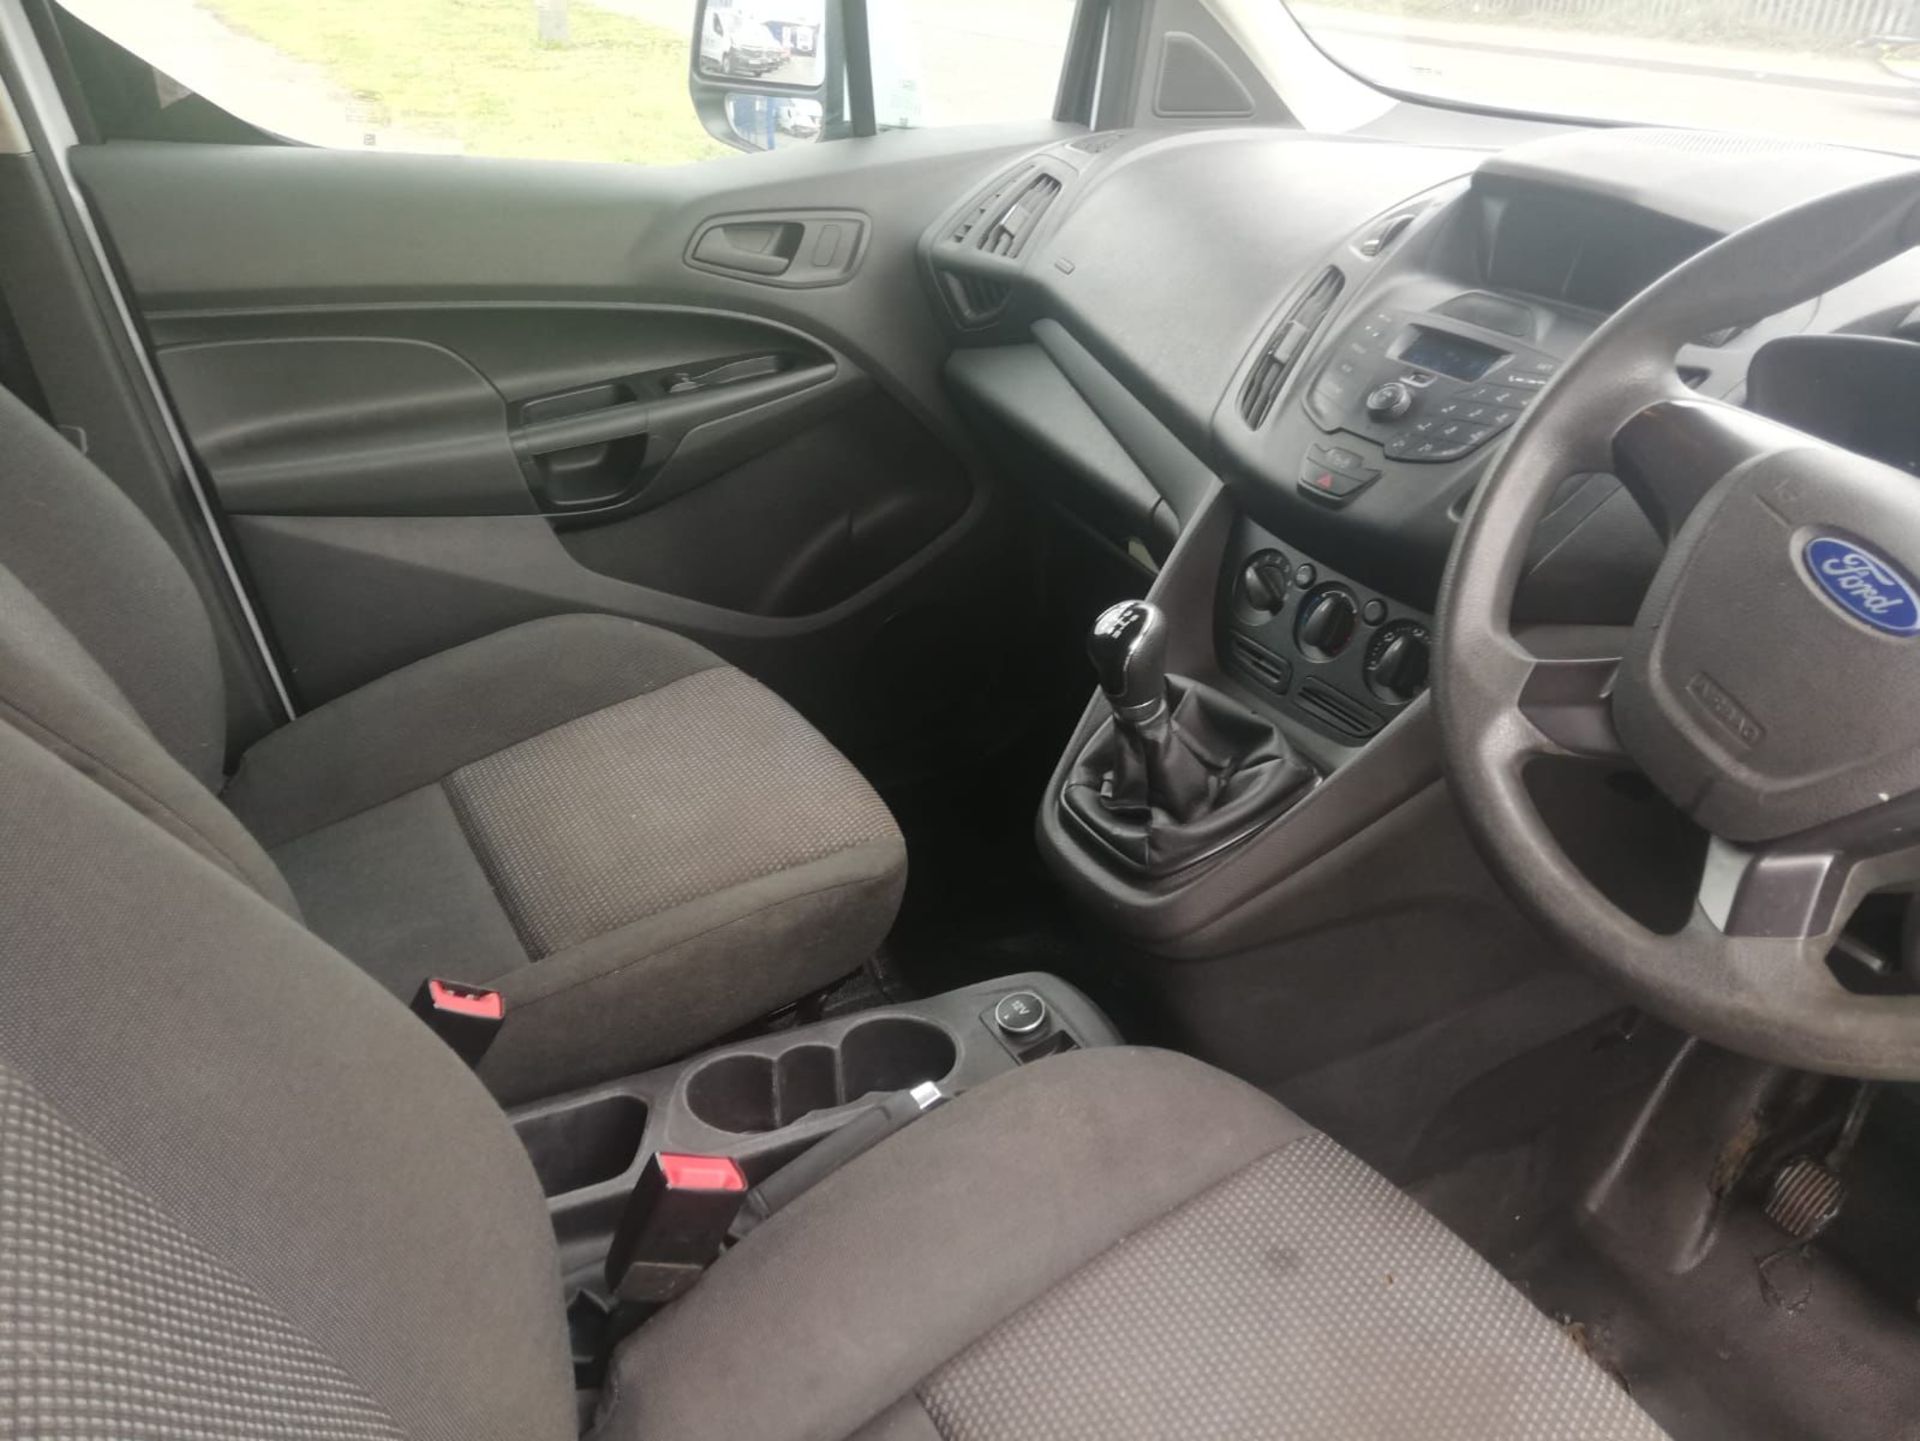 2017 17 FORD TRANSIT CONNECT PANEL VAN - EURO 6 - 145K MILES - PLY LINED. - Image 9 of 10